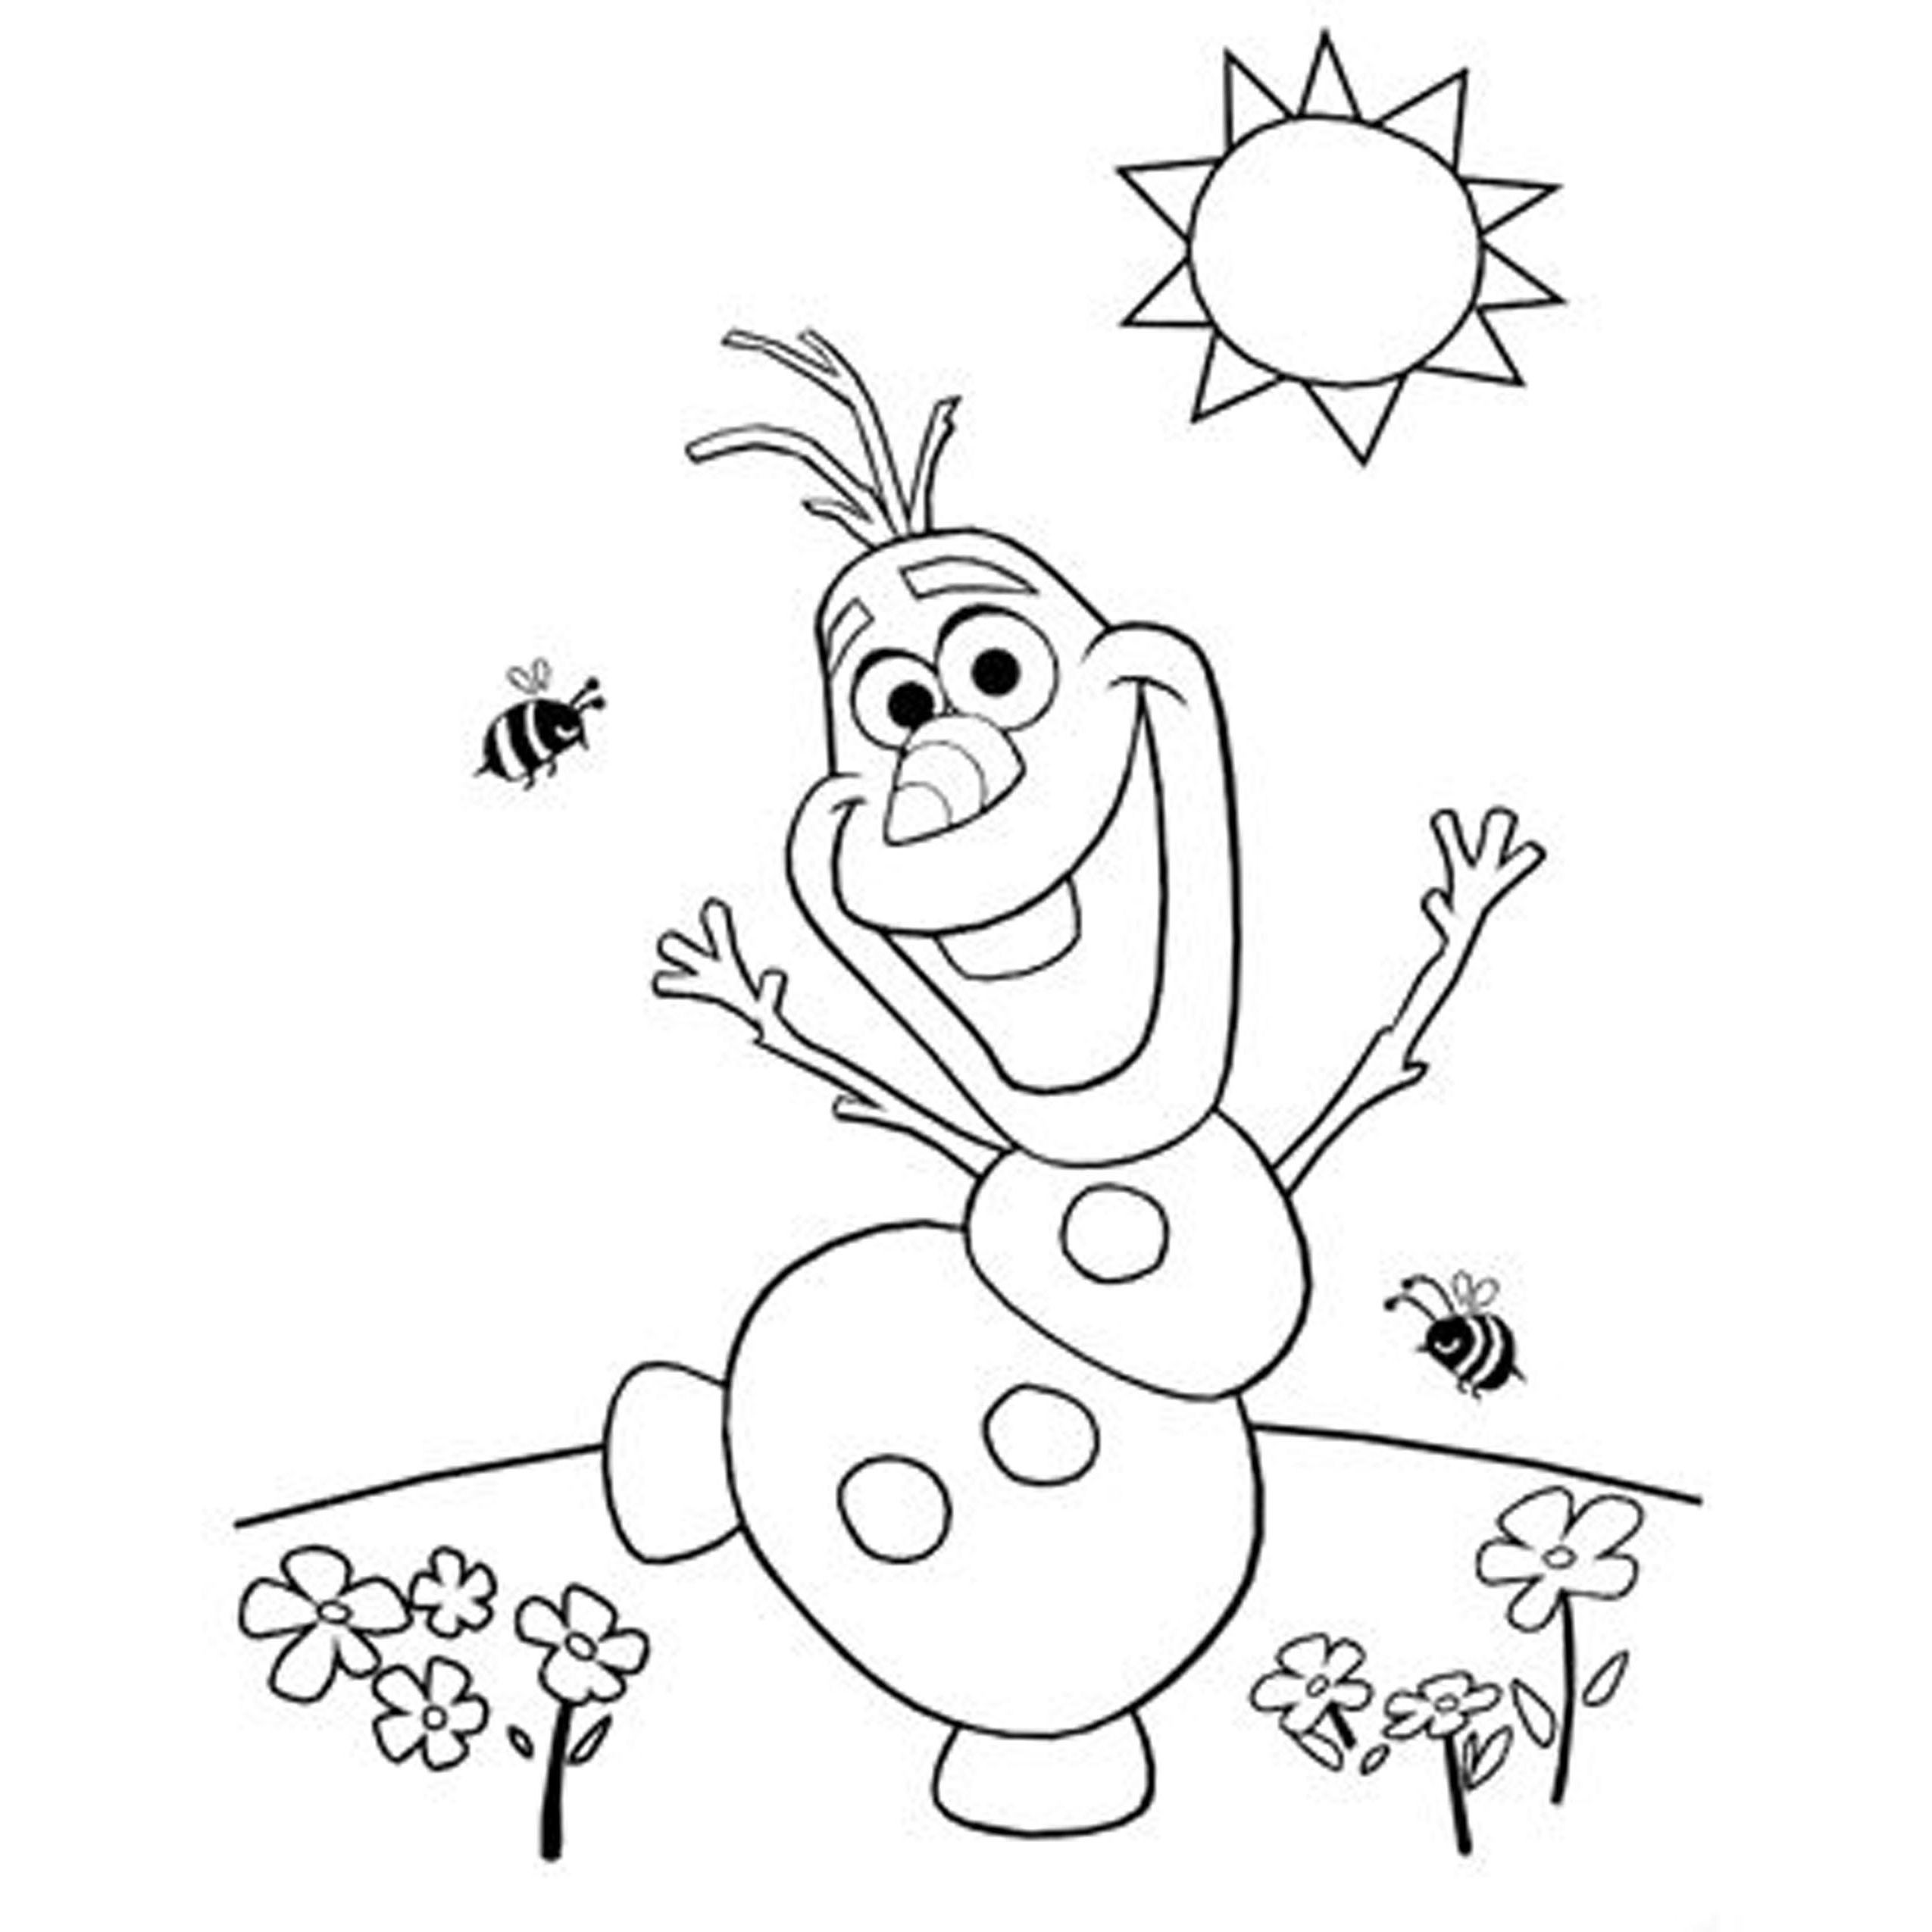 Frozen Coloring Pages For Kids
 Frozen Drawing For Kids at GetDrawings